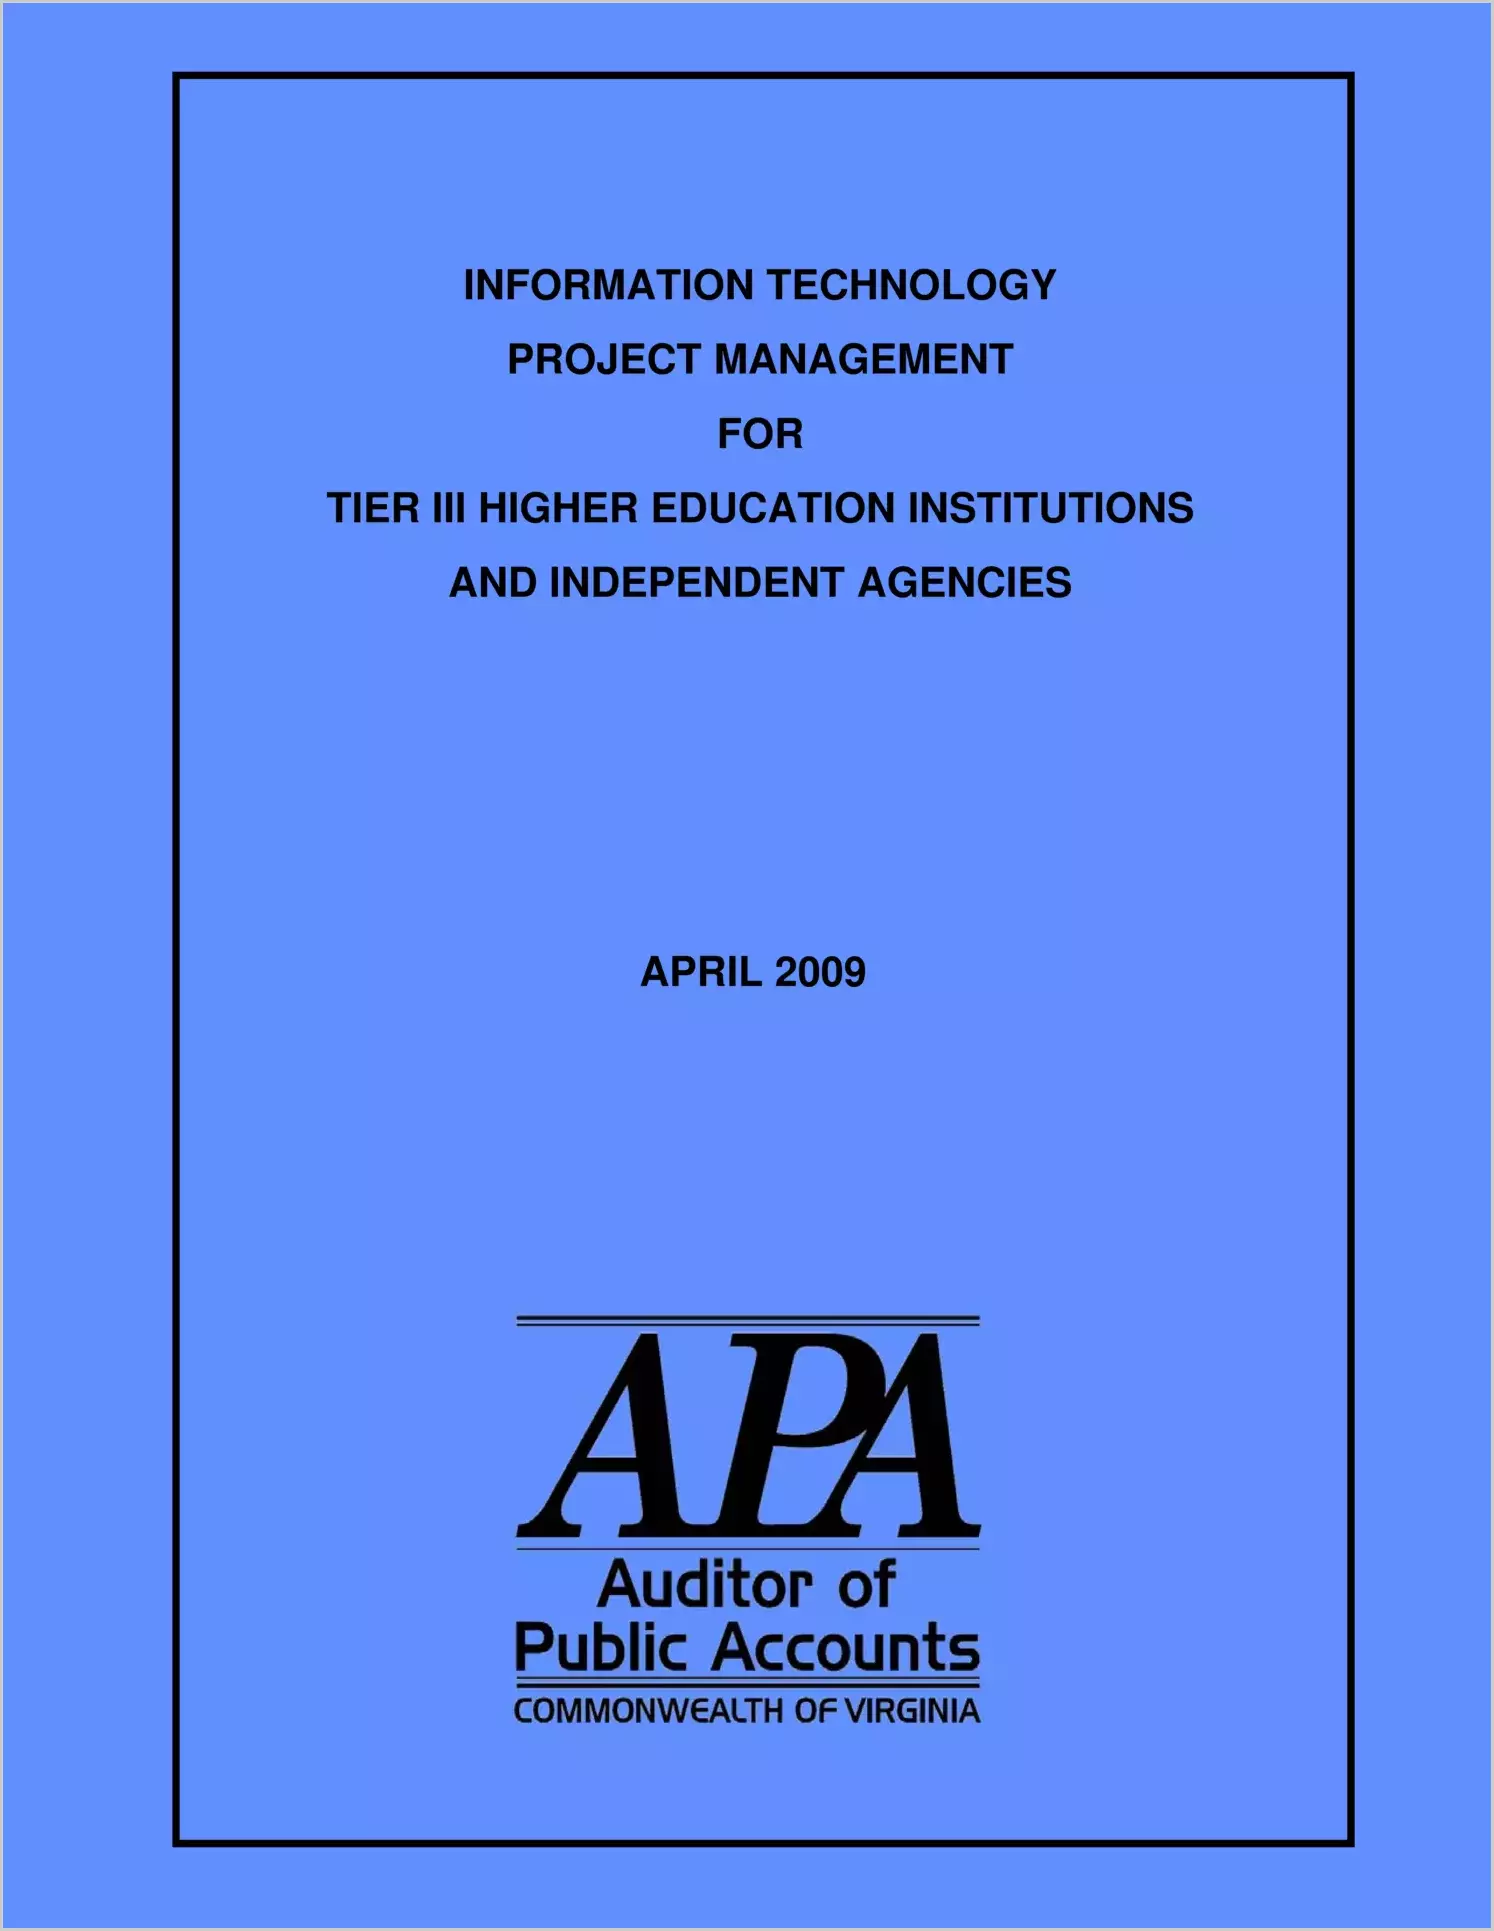 Information Technology Project Management for Tier III Higher Education Istitutions and Independent Agencies